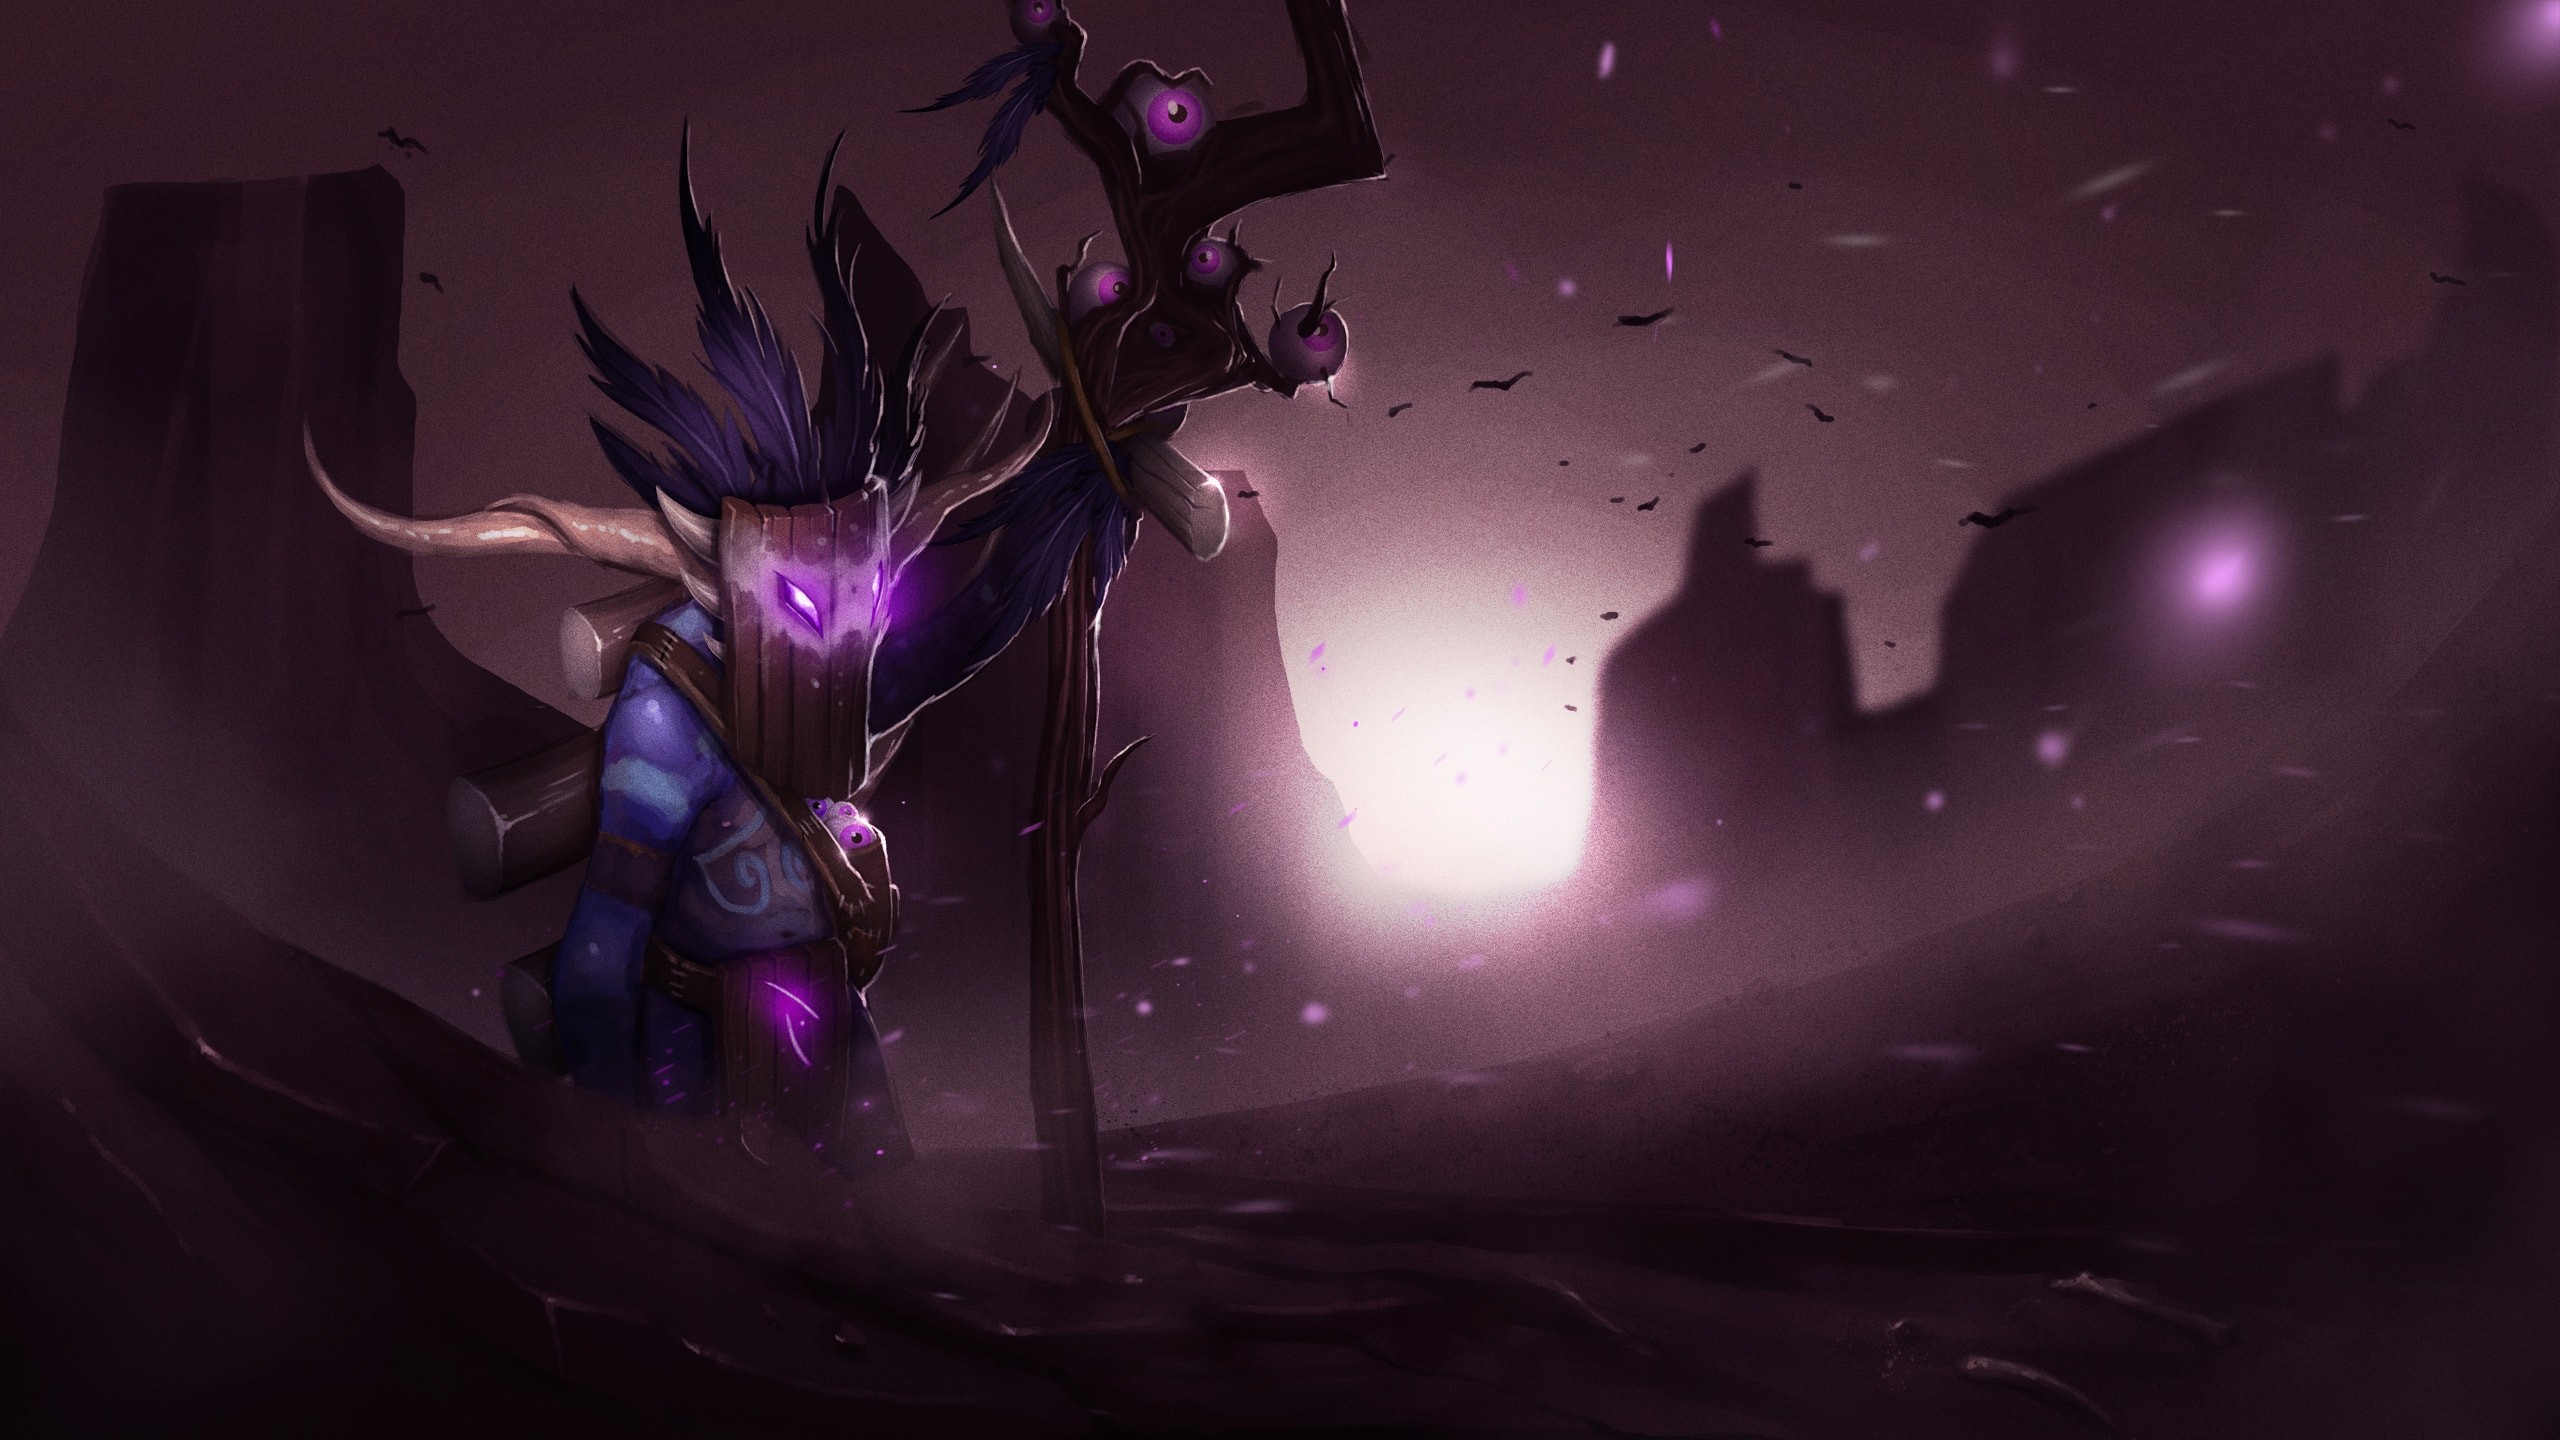 2560x1440 Dota2 : Witch Doctor Wallpapers Dota2 : Witch Doctor Wallpapers hd